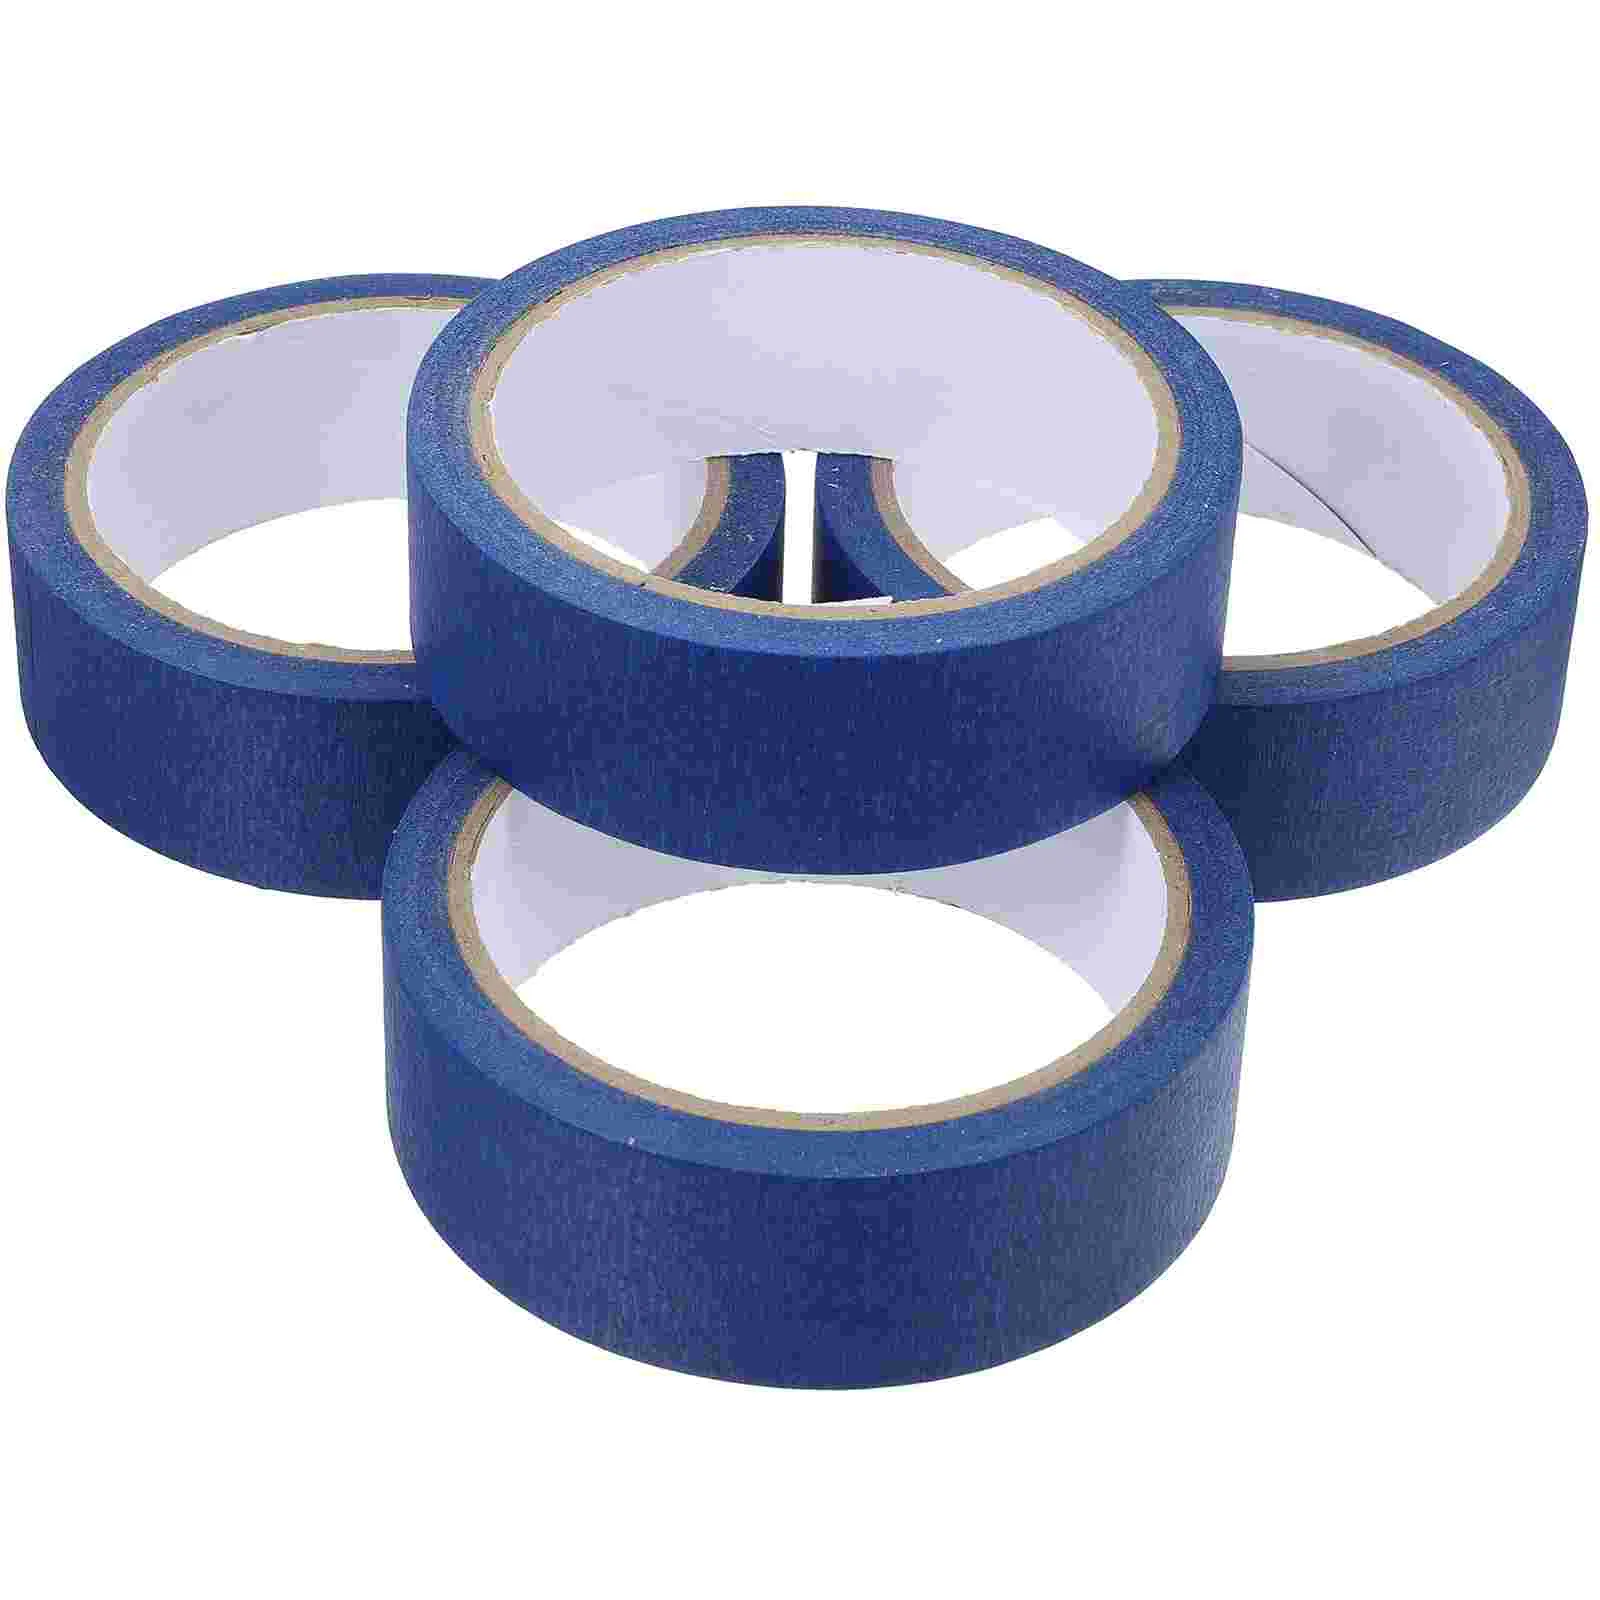 Blue Masking Tape DIY Tapes Crafts Adhesive Paint for Painting Painter Duct journamm 6 designs kawaii animal washi paper tapes scrapbooking decoration sticker masking tapes diy creative stationery tape